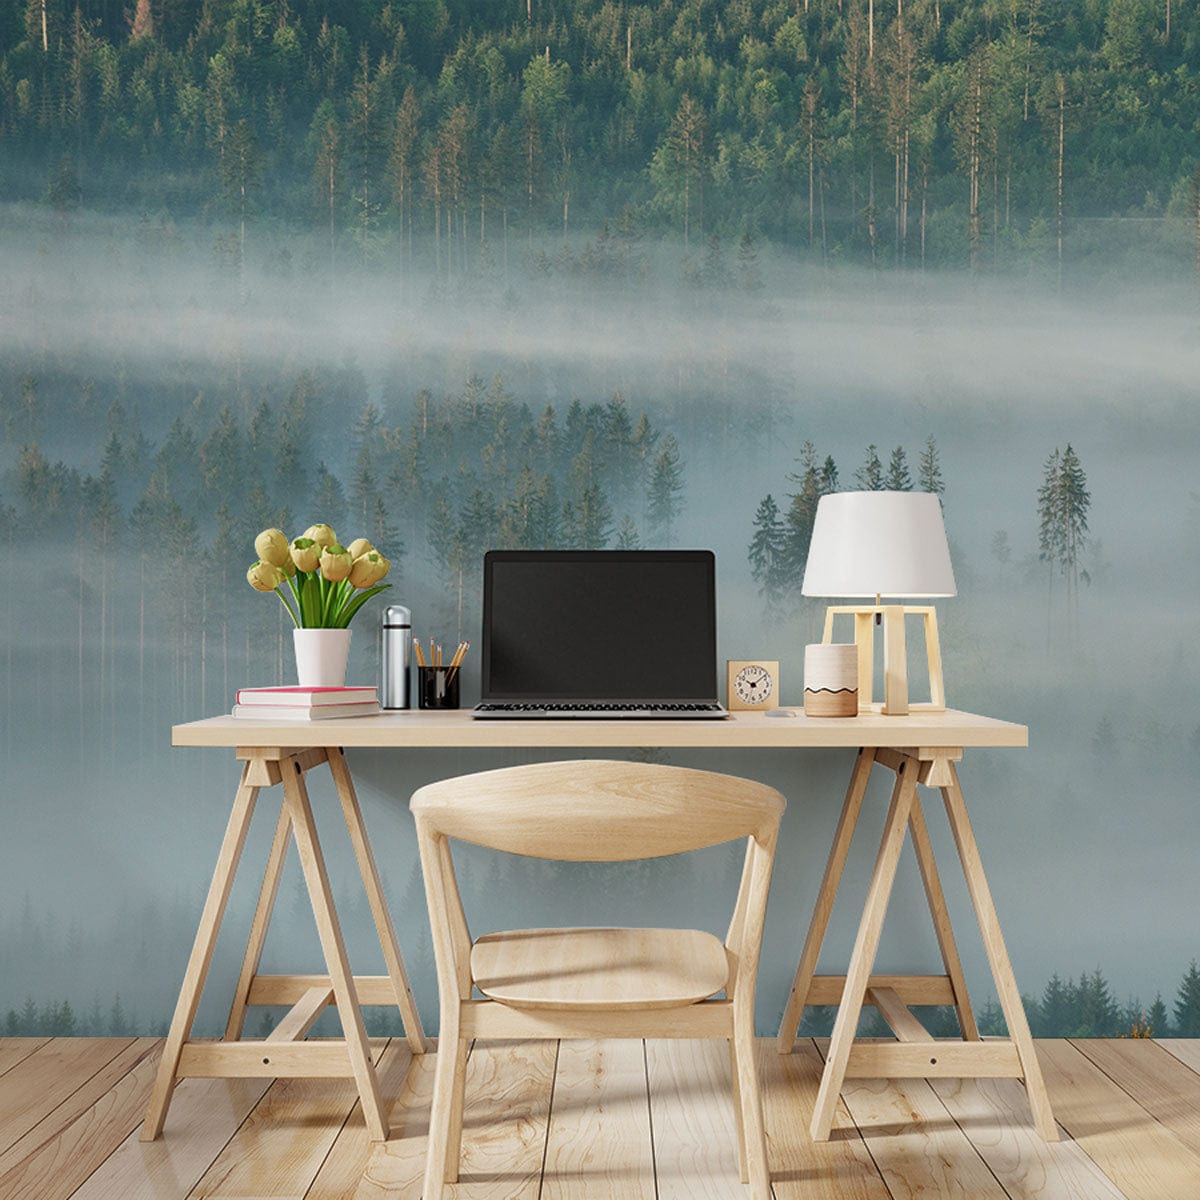 Designing an office with a green forest mural wallpaper